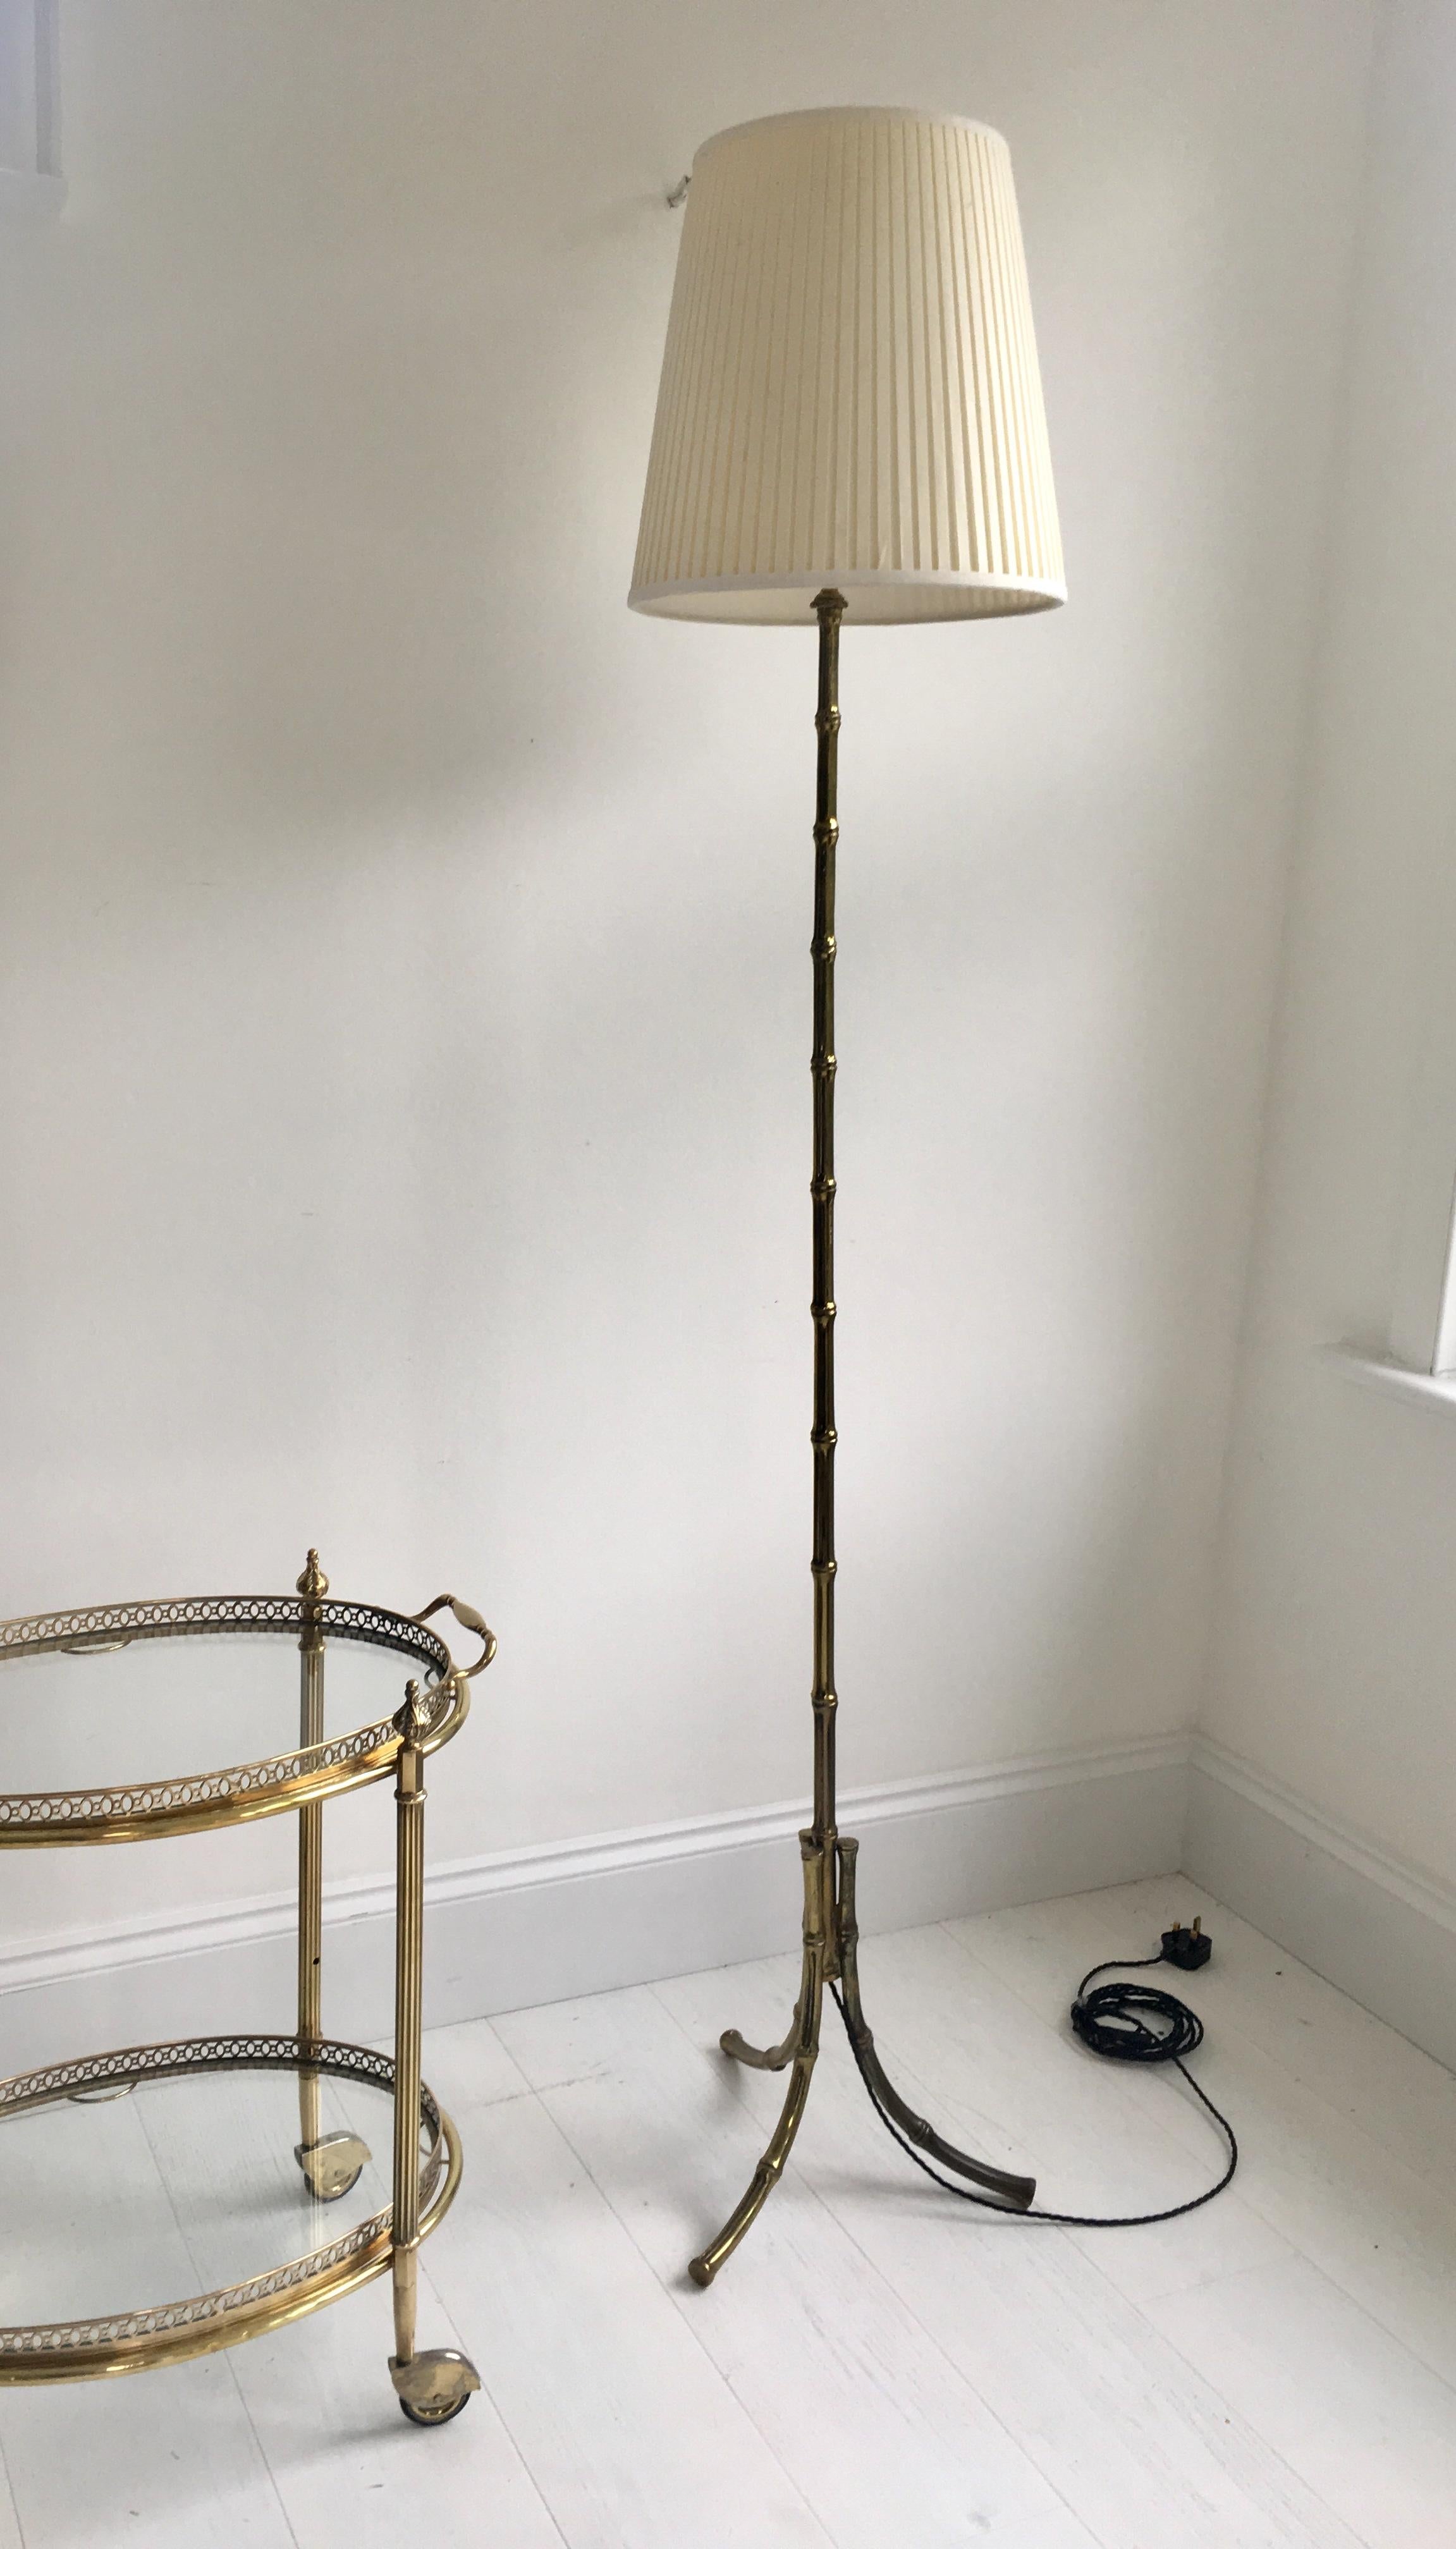 Elegant faux bamboo floor lamp from Paris, circa 1960.

Lacquered brass with aged patina.

Measures: Stands 147cm to light fitting.

Lamp shades excluded.

